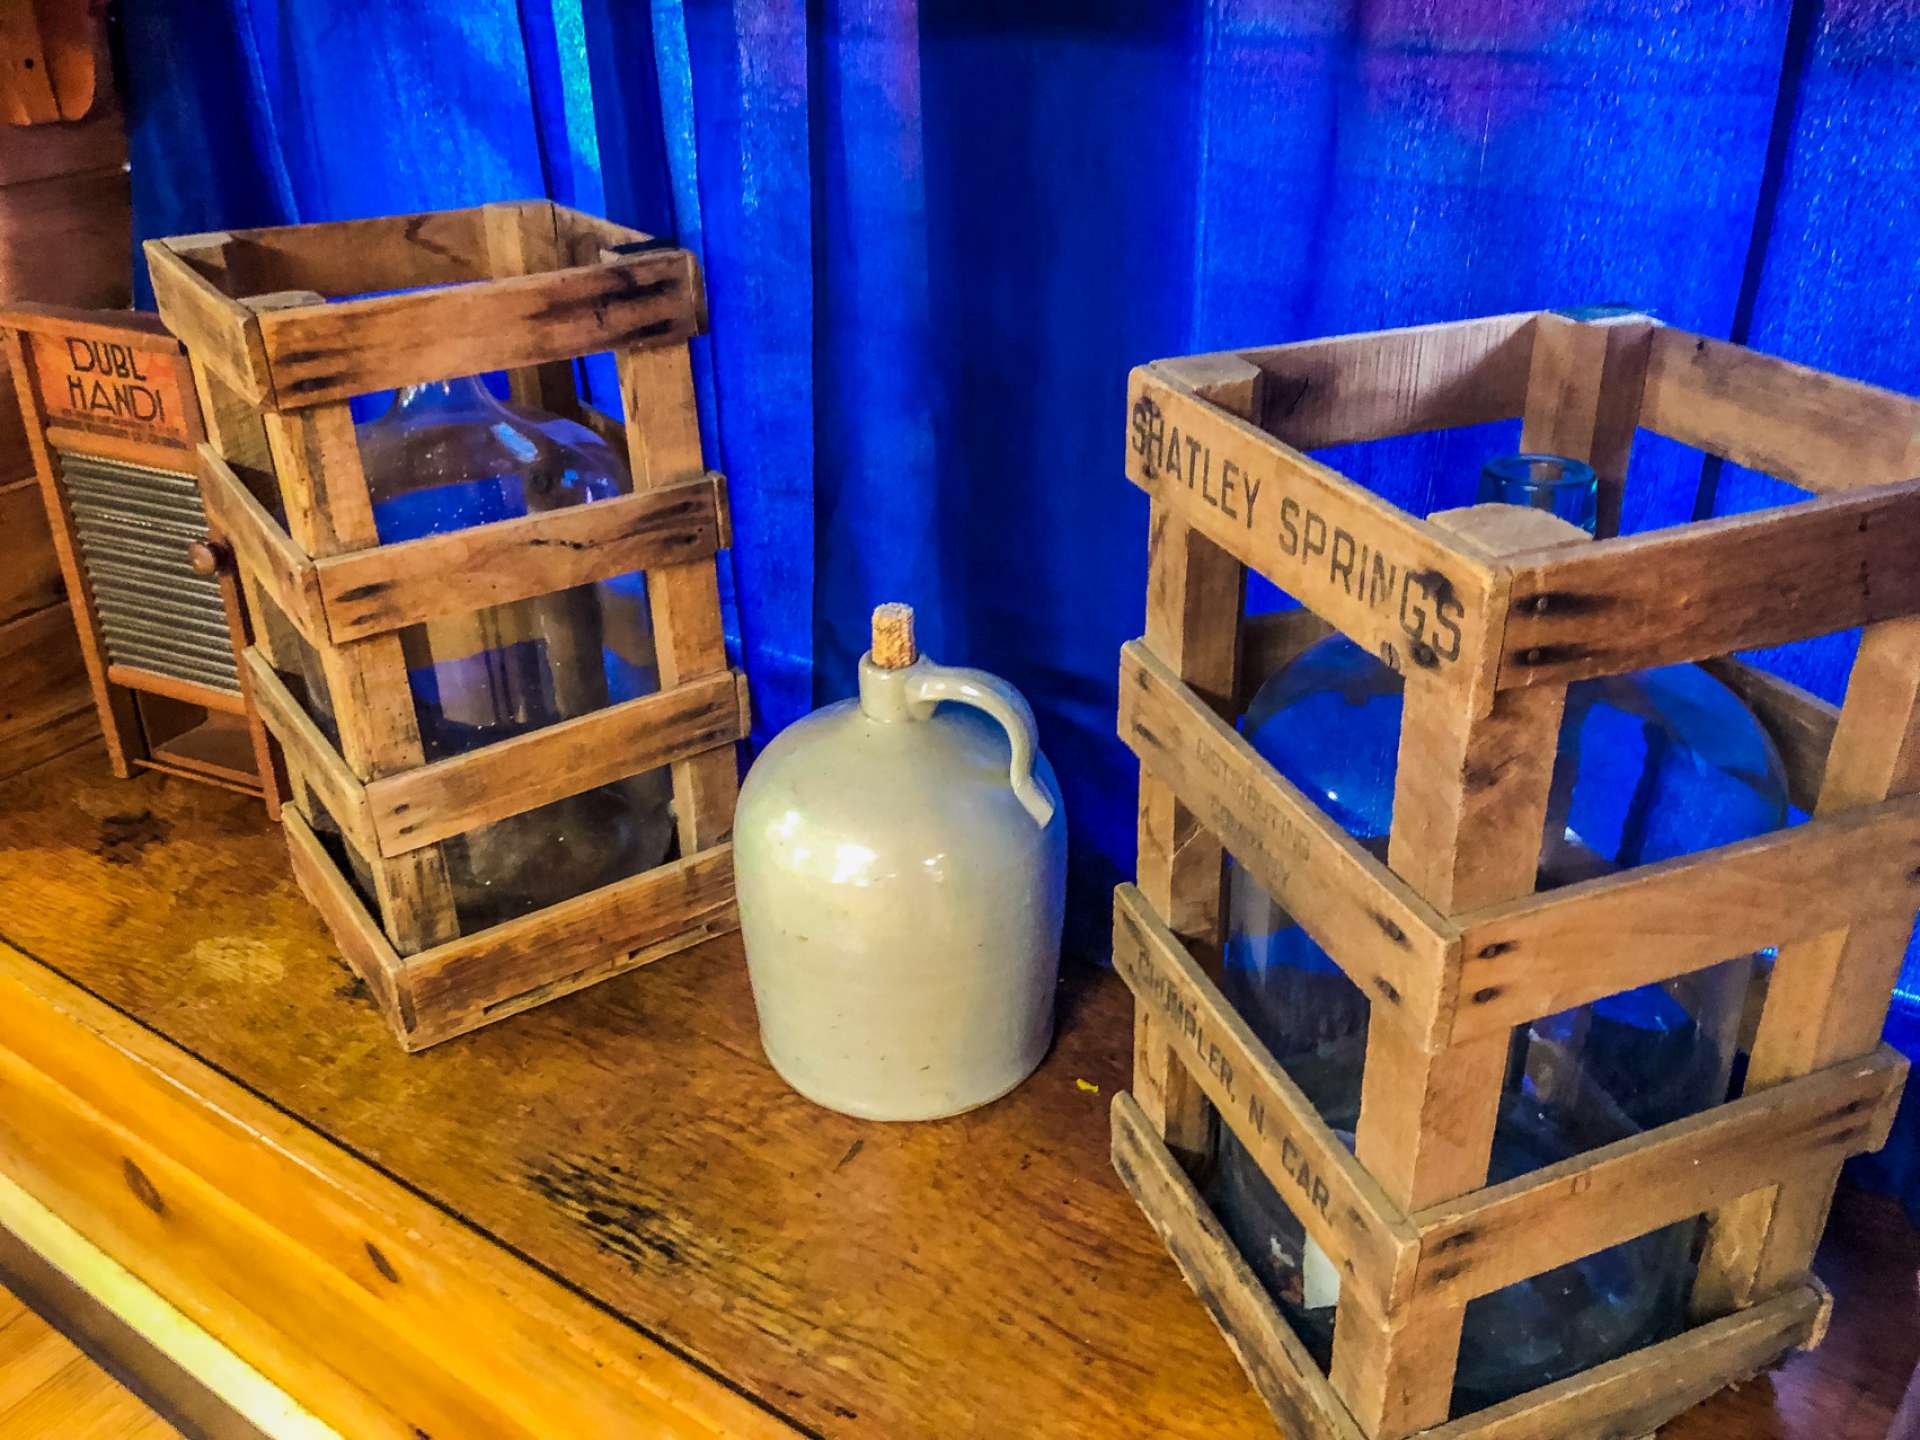 Examples of the antique bottles and jugs that have been used over the years to collect water from Shatley Springs.